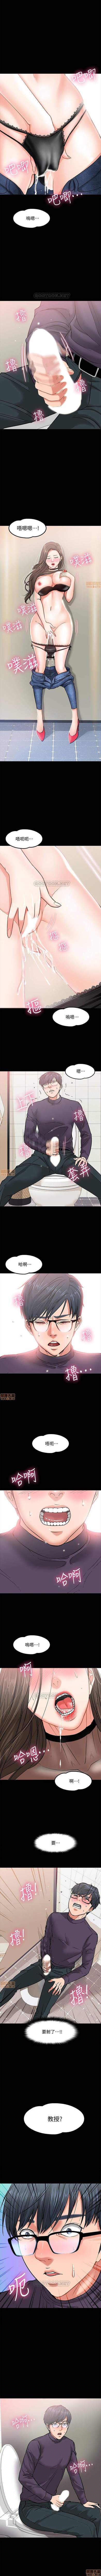 PROFESSOR, ARE YOU JUST GOING TO LOOK AT ME? | DESIRE SWAMP | 教授，你還等什麼? Ch. 3 [Chinese] Manhwa 6